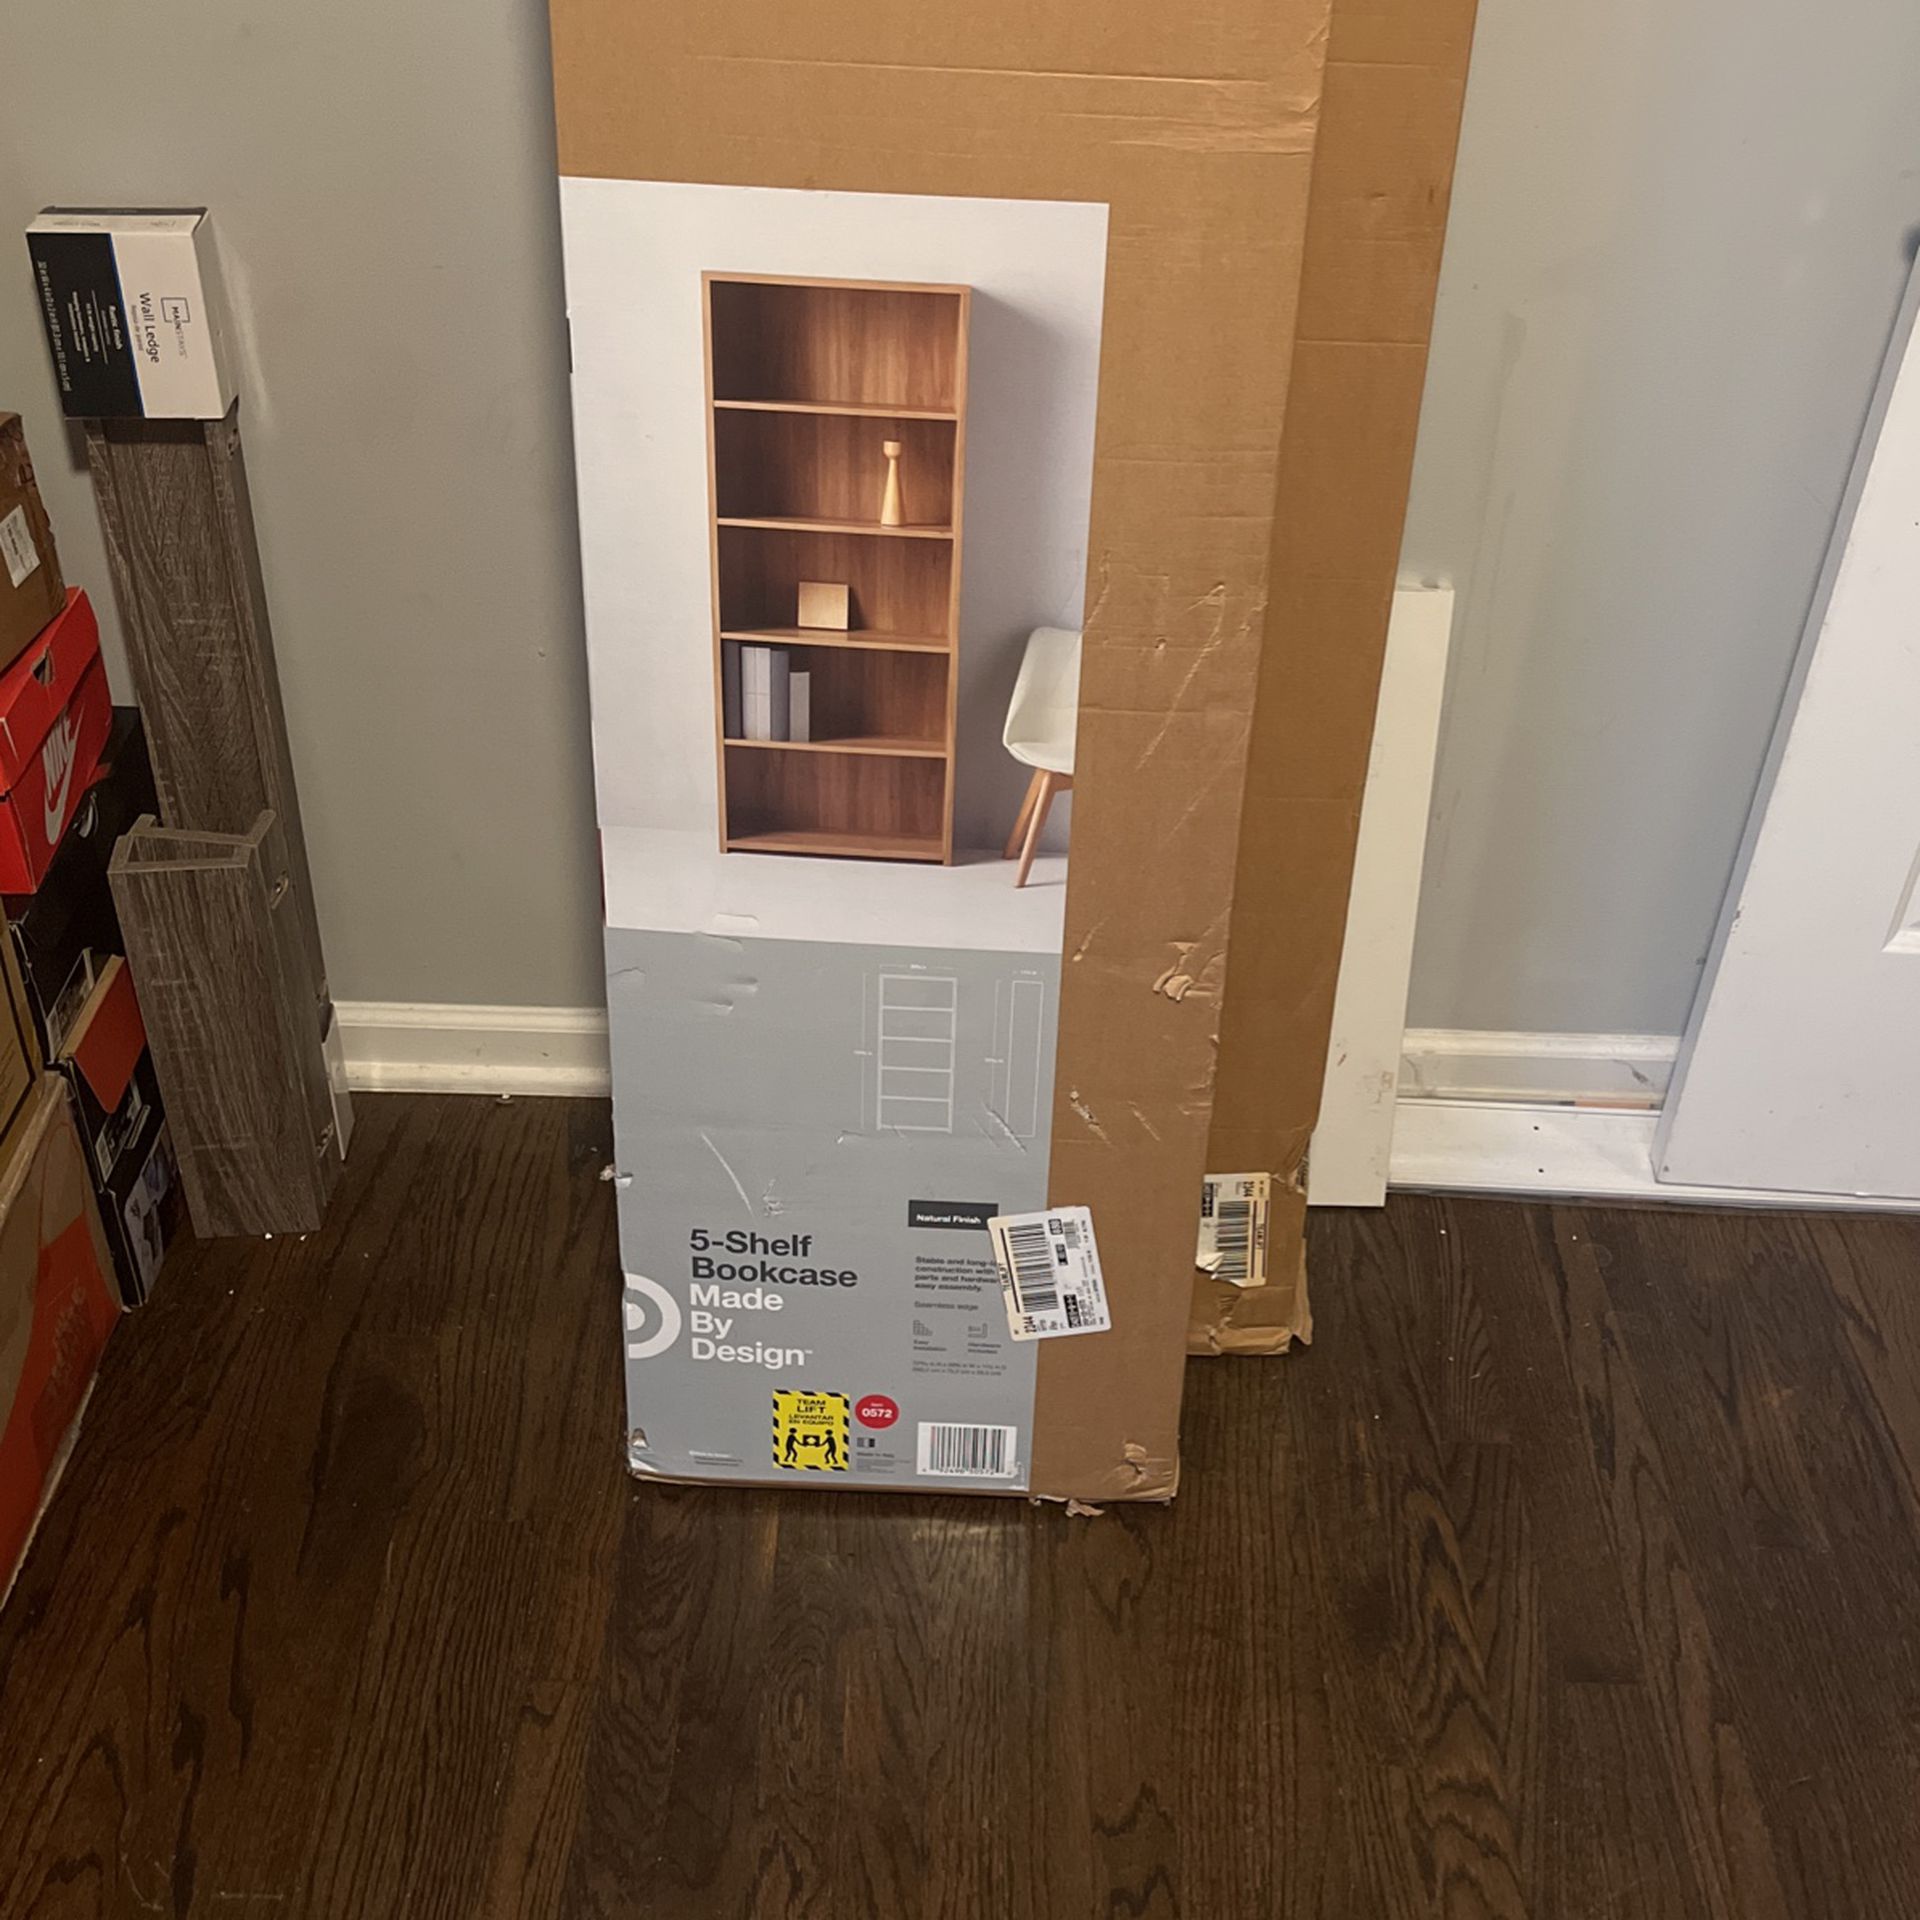 Two Target 5 Shelf Bookcases